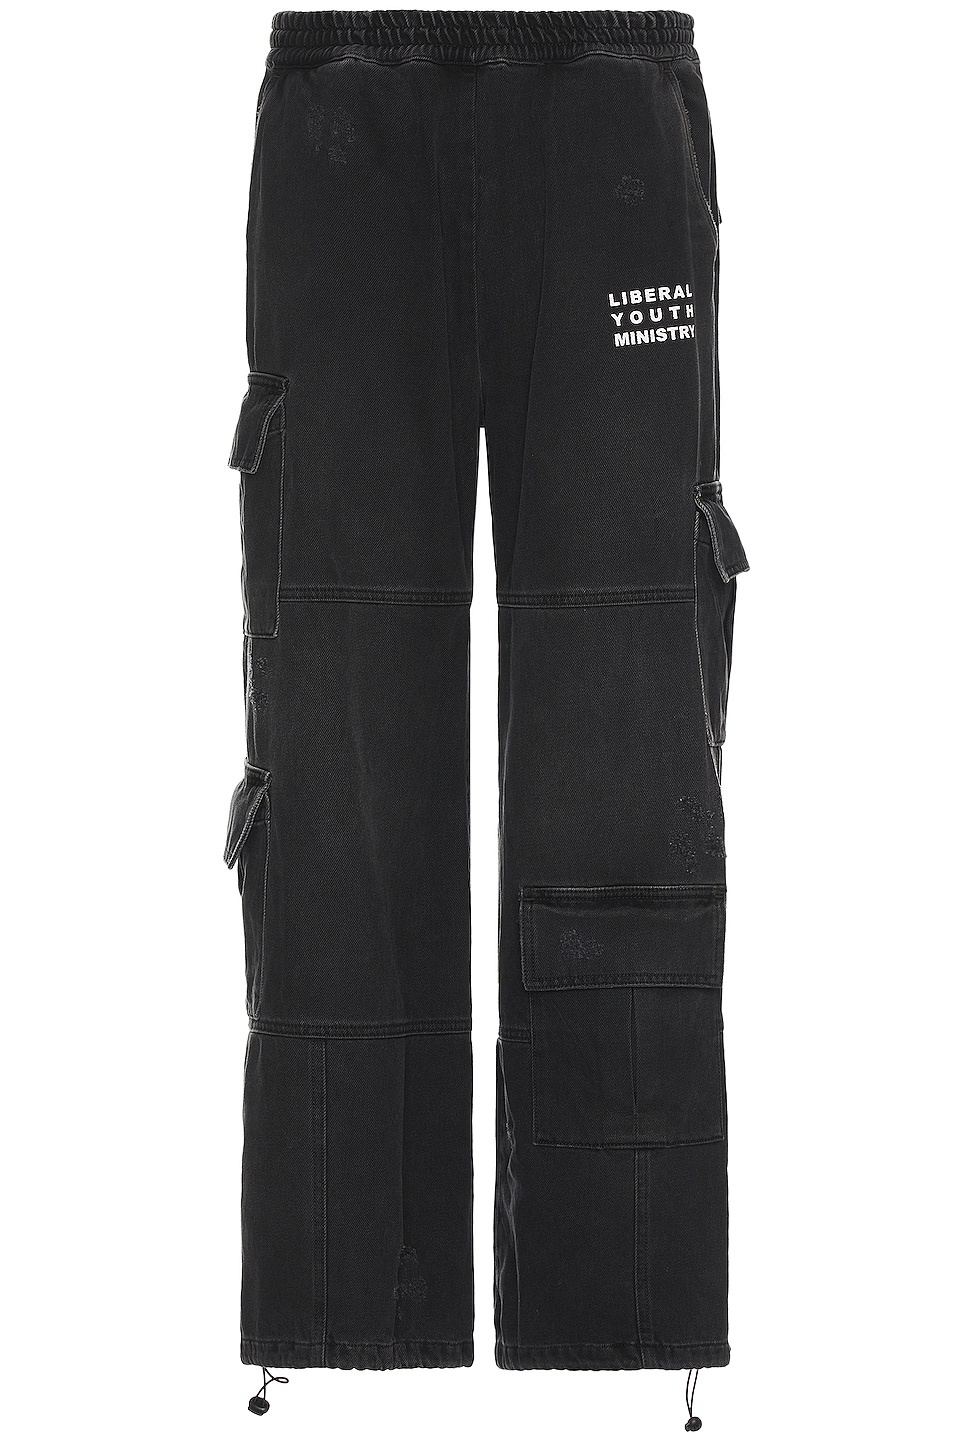 Image 1 of Liberal Youth Ministry Denim Cargo Pants in Black